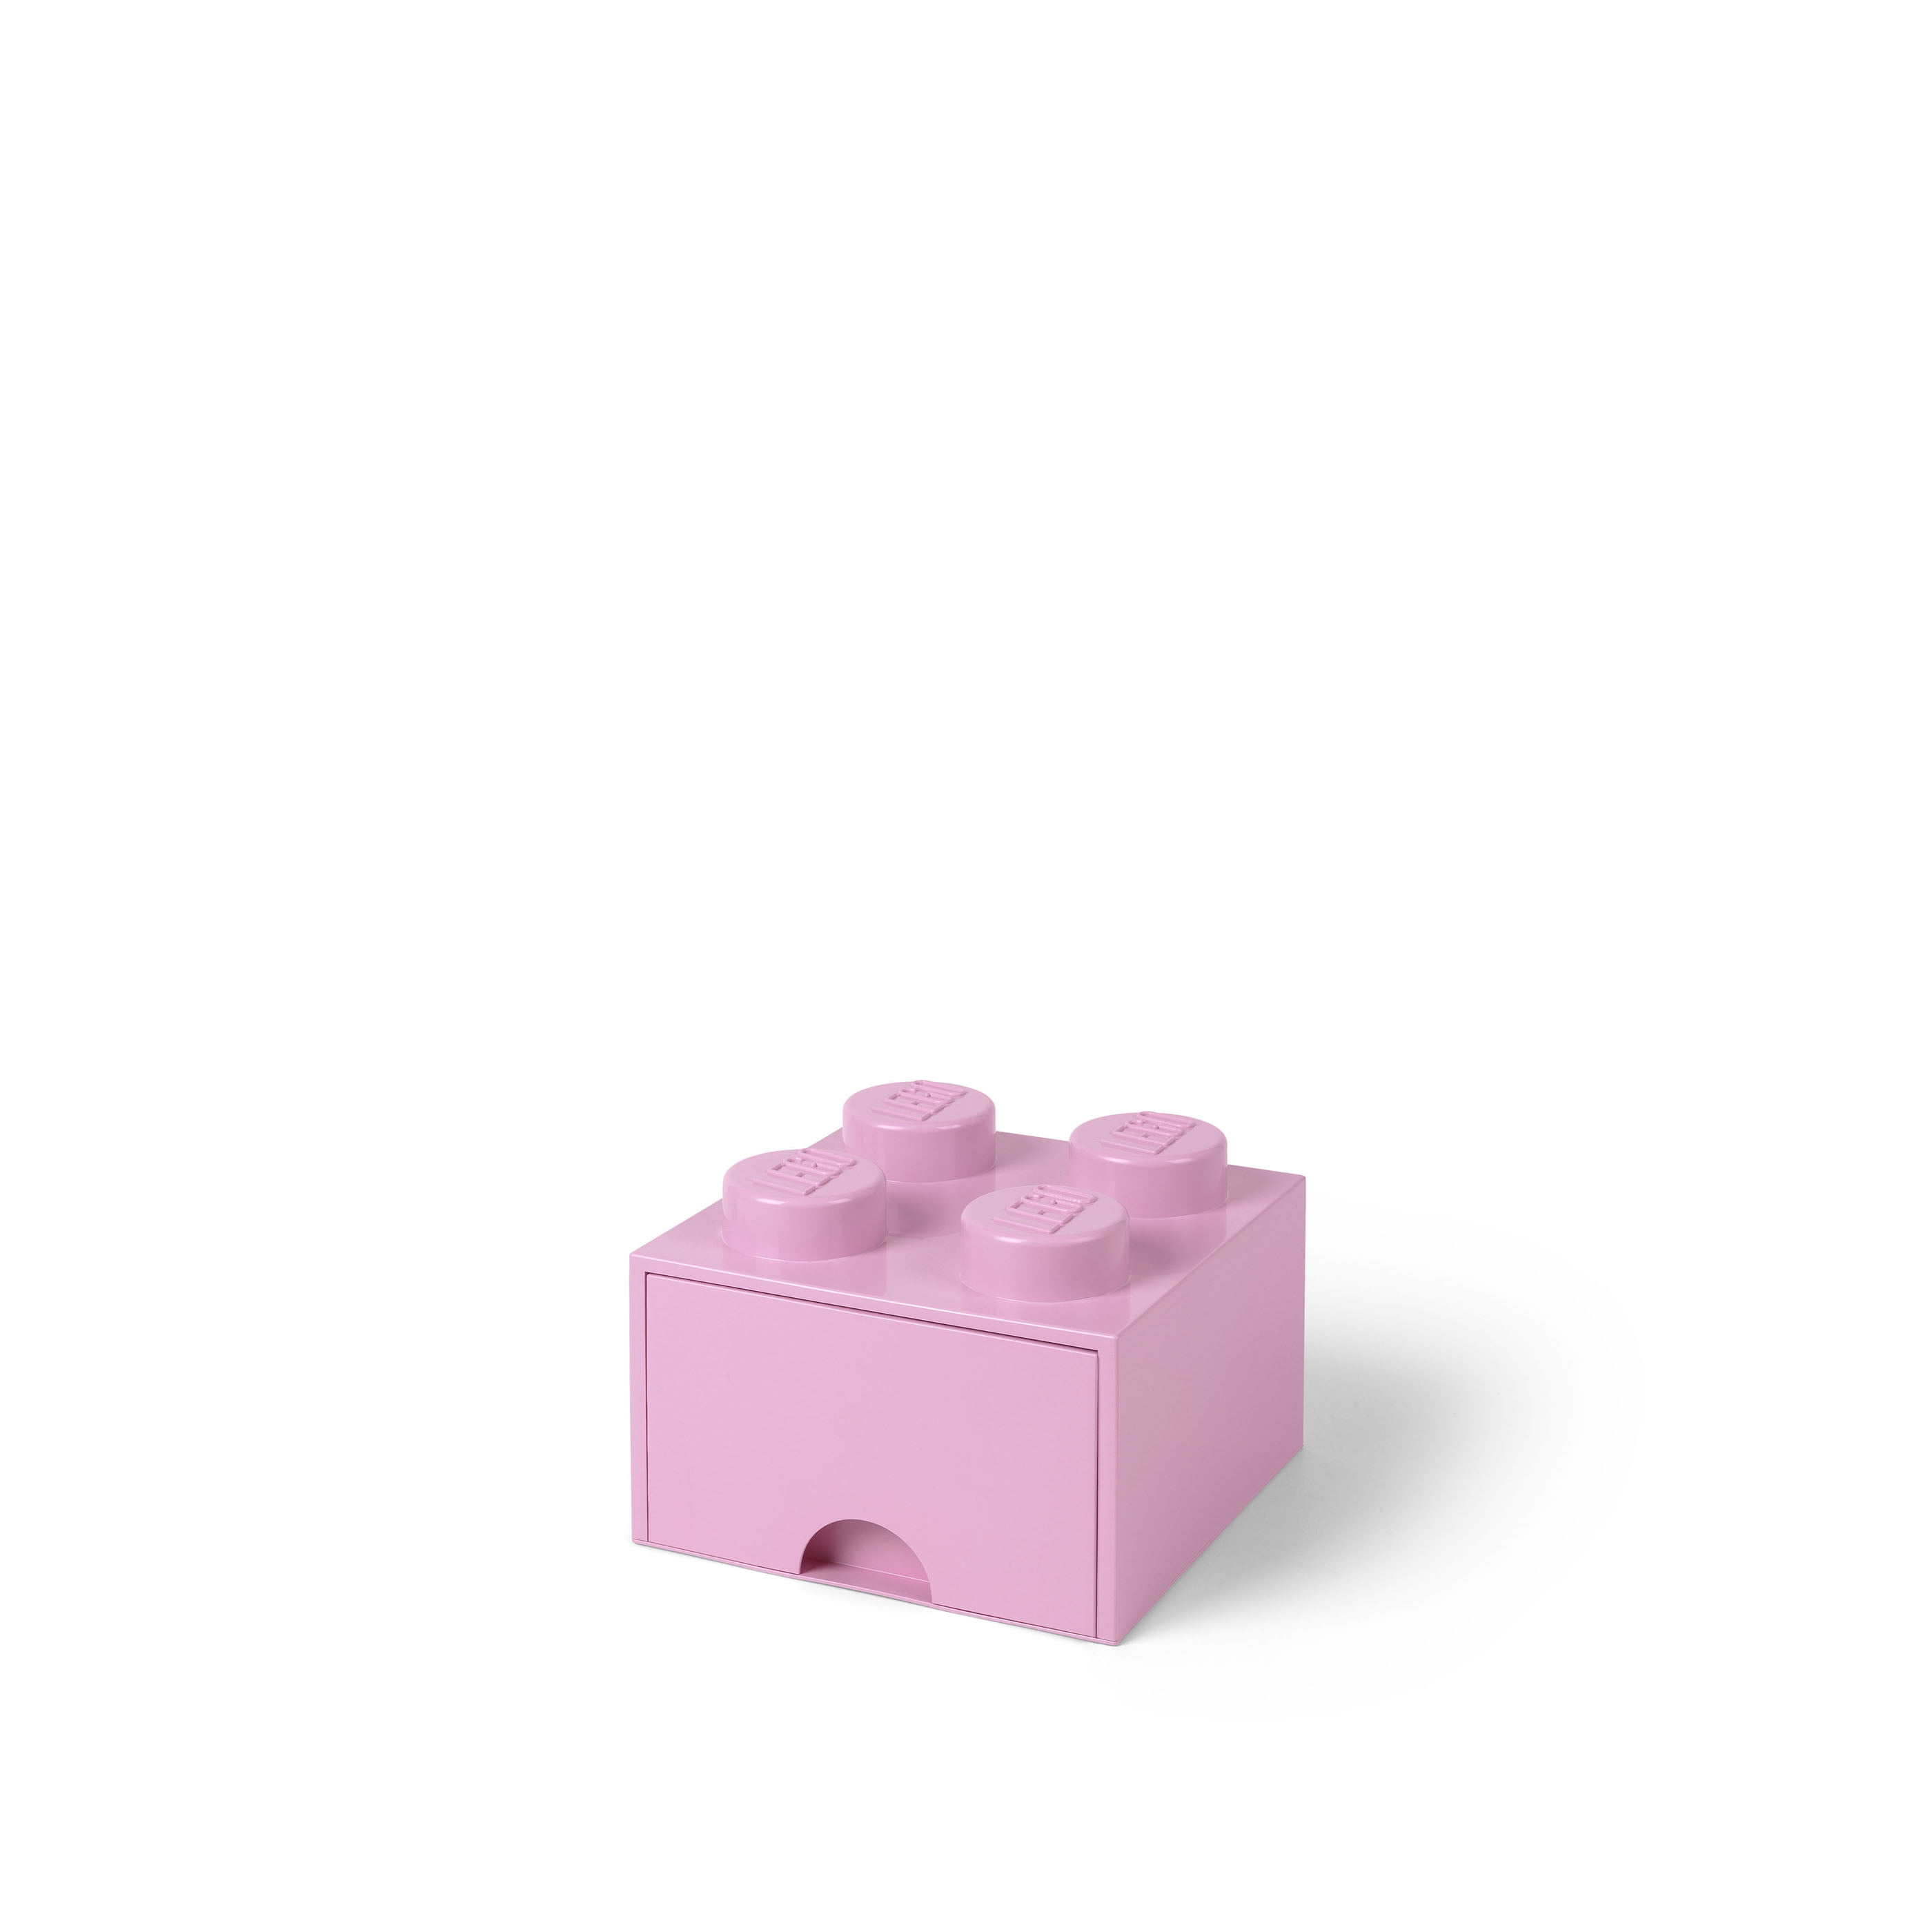 Lego Storage Brick Box 4 Knob In 5 Colours Red Yellow Green Pink Or Blue NEW 